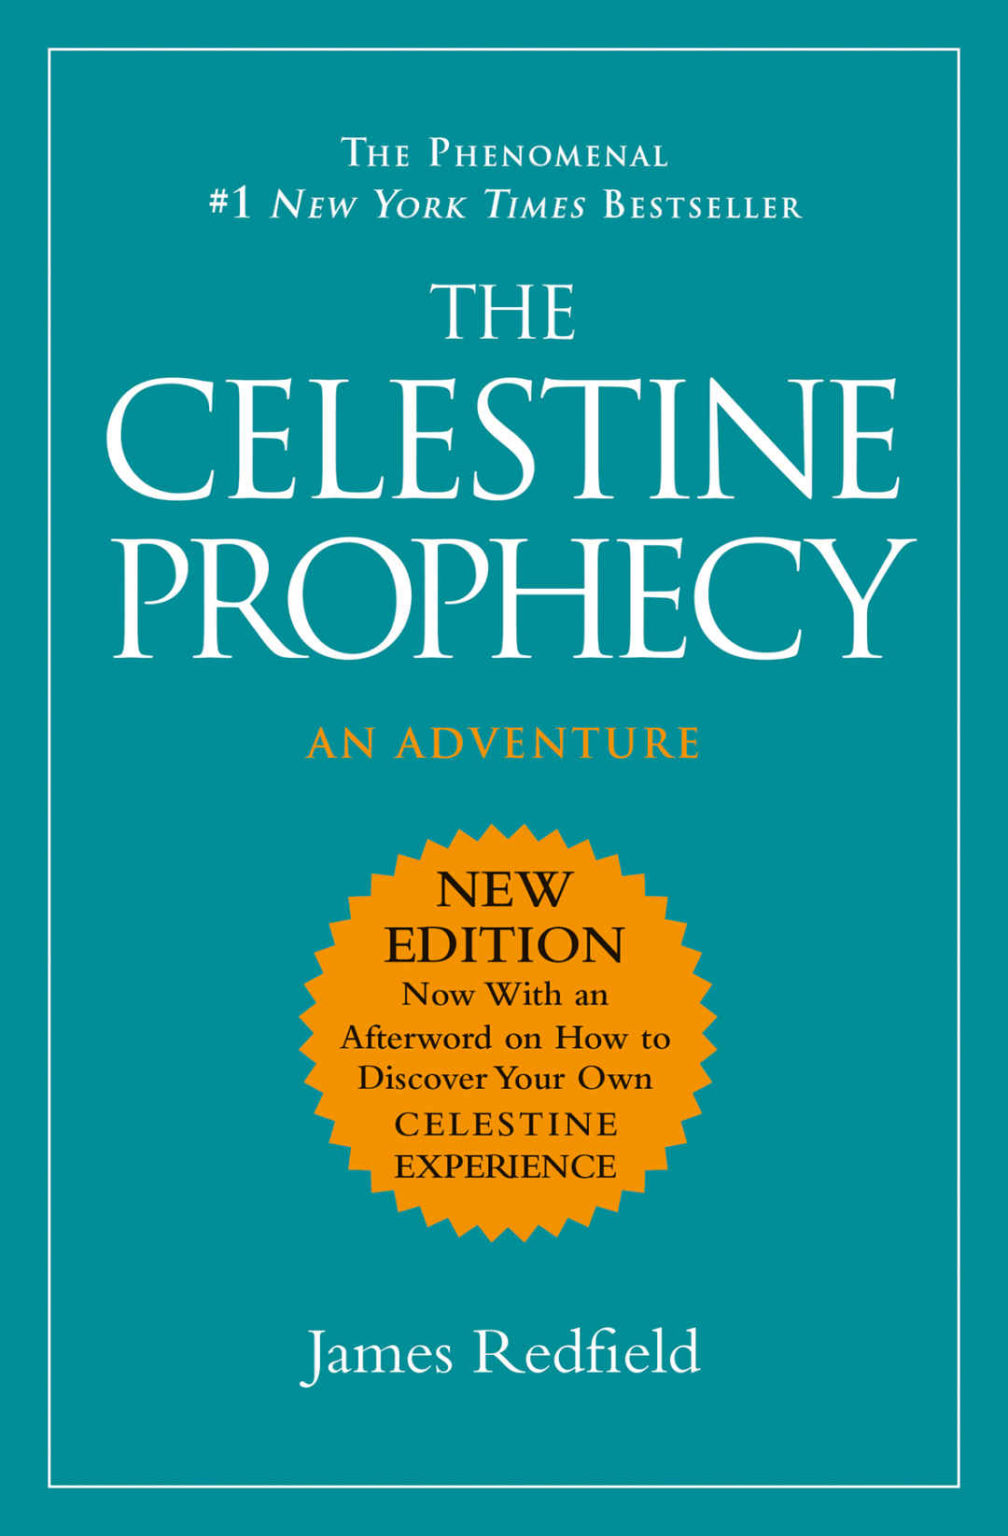 the celestine prophecy review